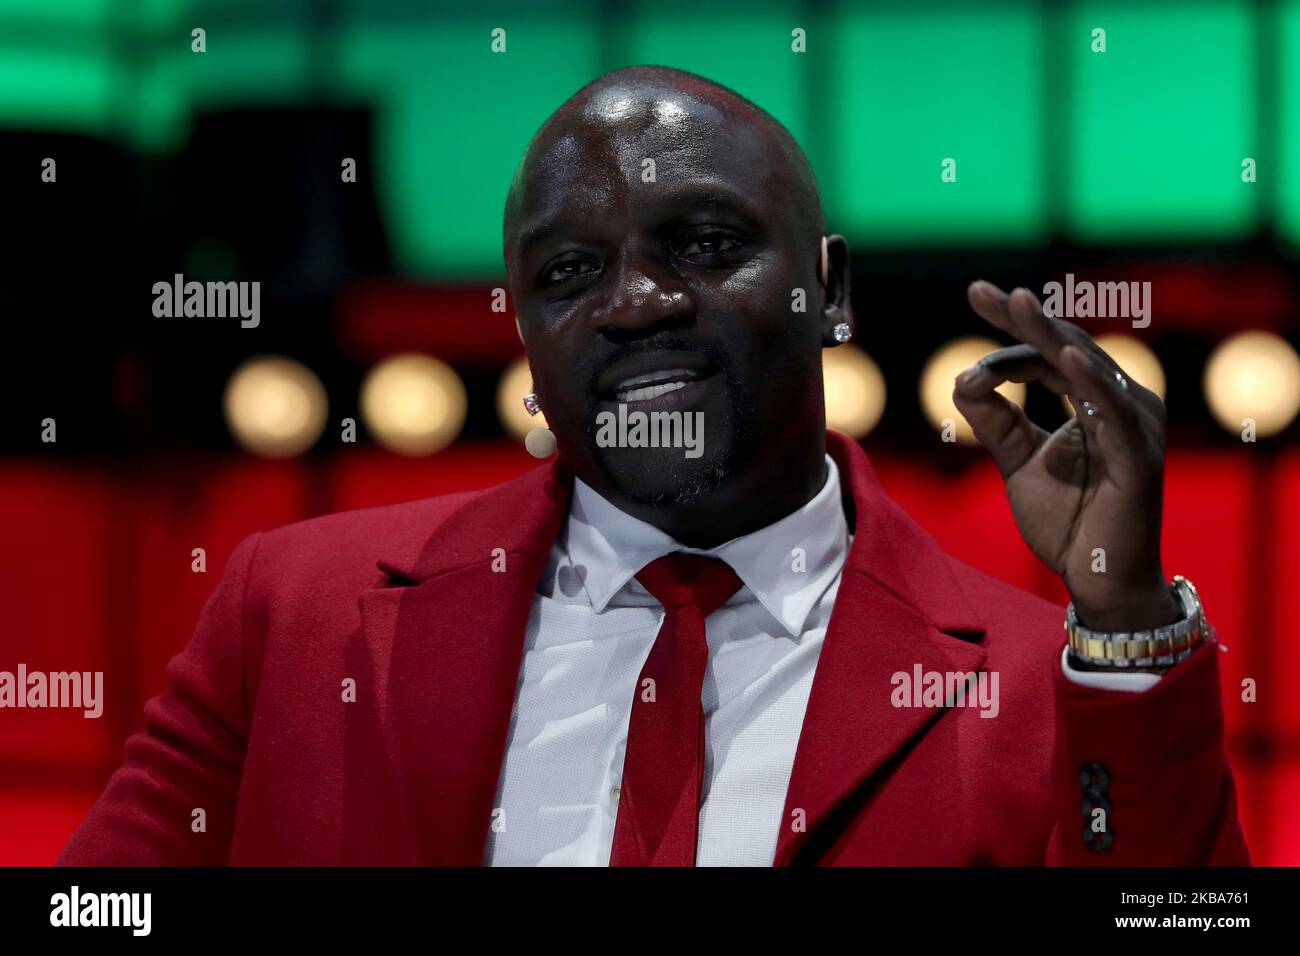 Global artist and Chairman and co-founder of Akoin, Akon speaks during the annual Web Summit technology conference in Lisbon, Portugal on November 6, 2019. (Photo by Pedro FiÃºza/NurPhoto) Stock Photo